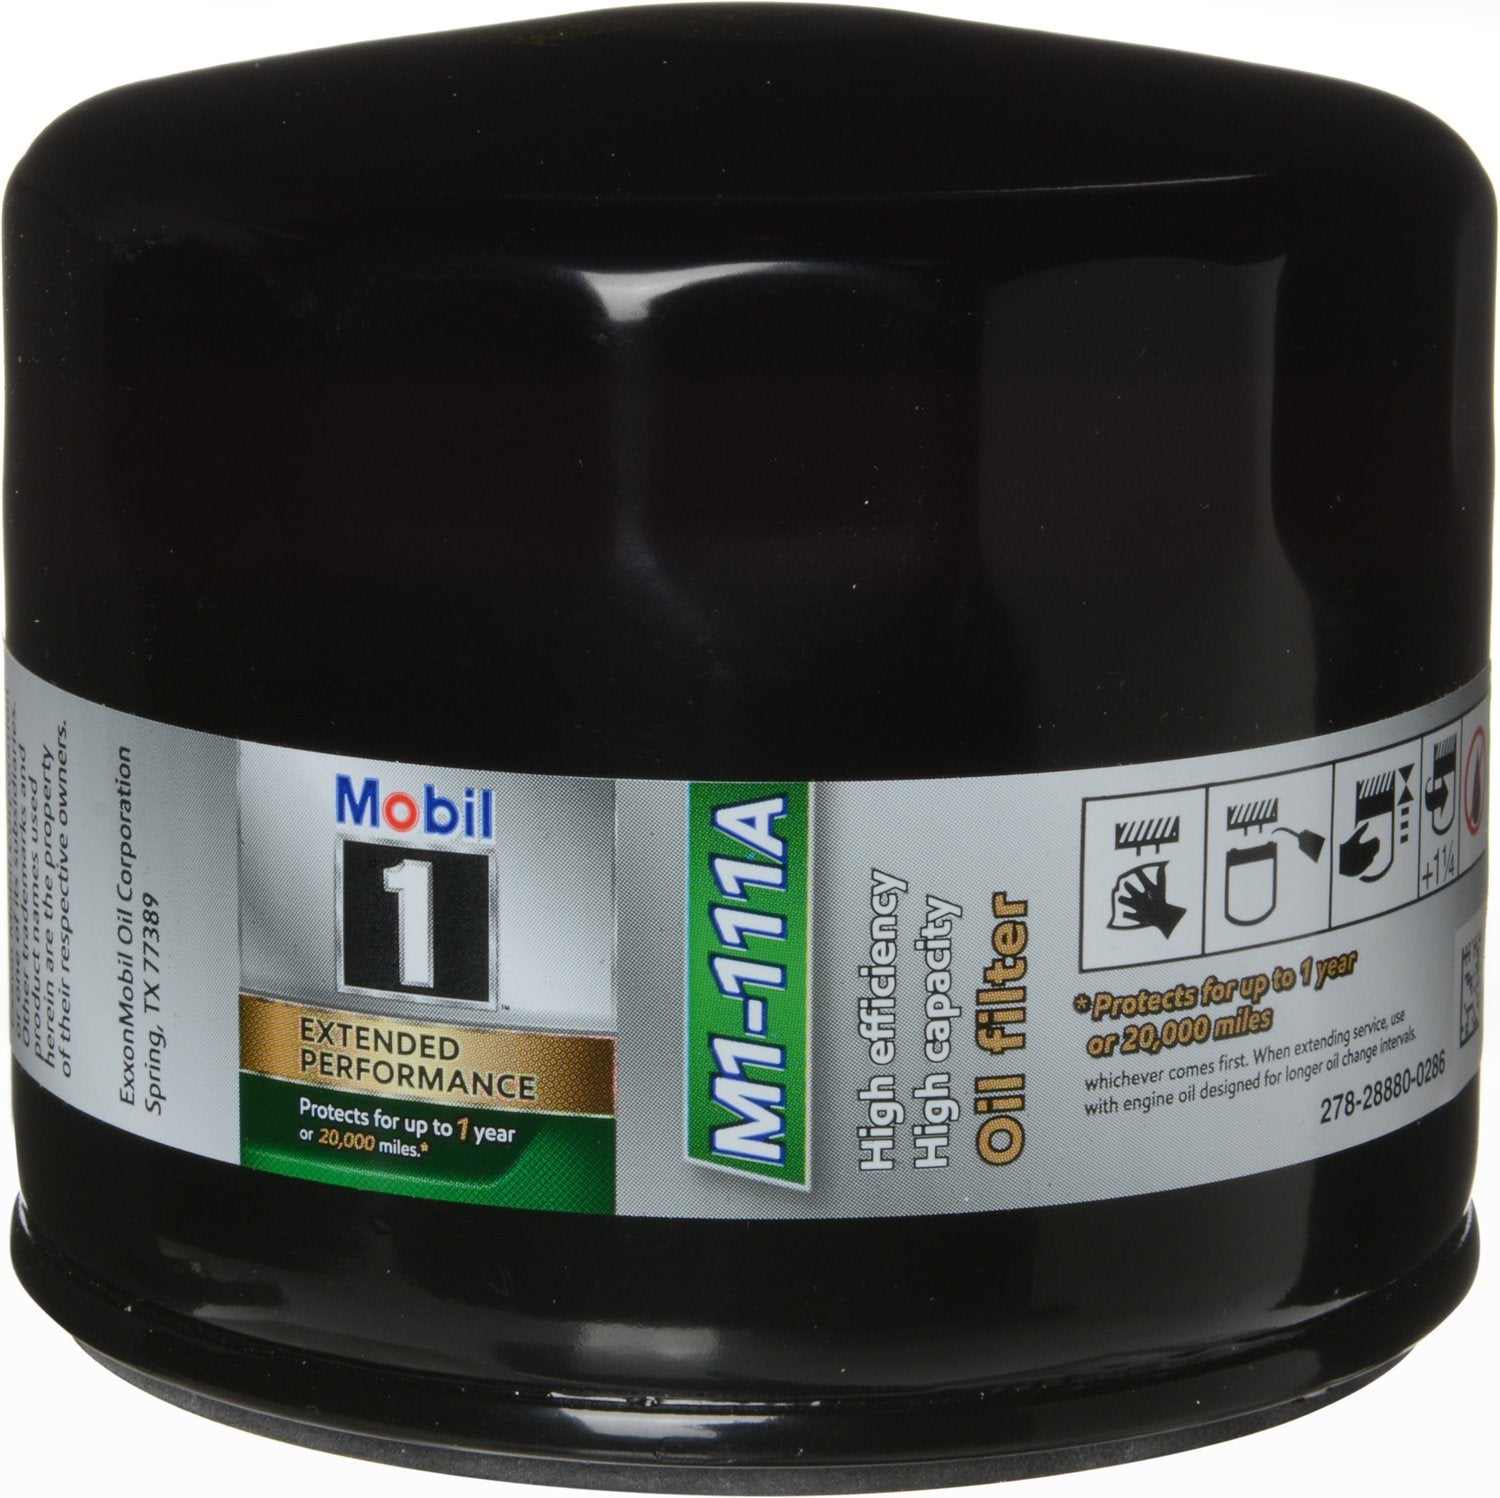 Mobil 1 M1-111A Extended Performance Oil Filter, 1 Pack  - Like New